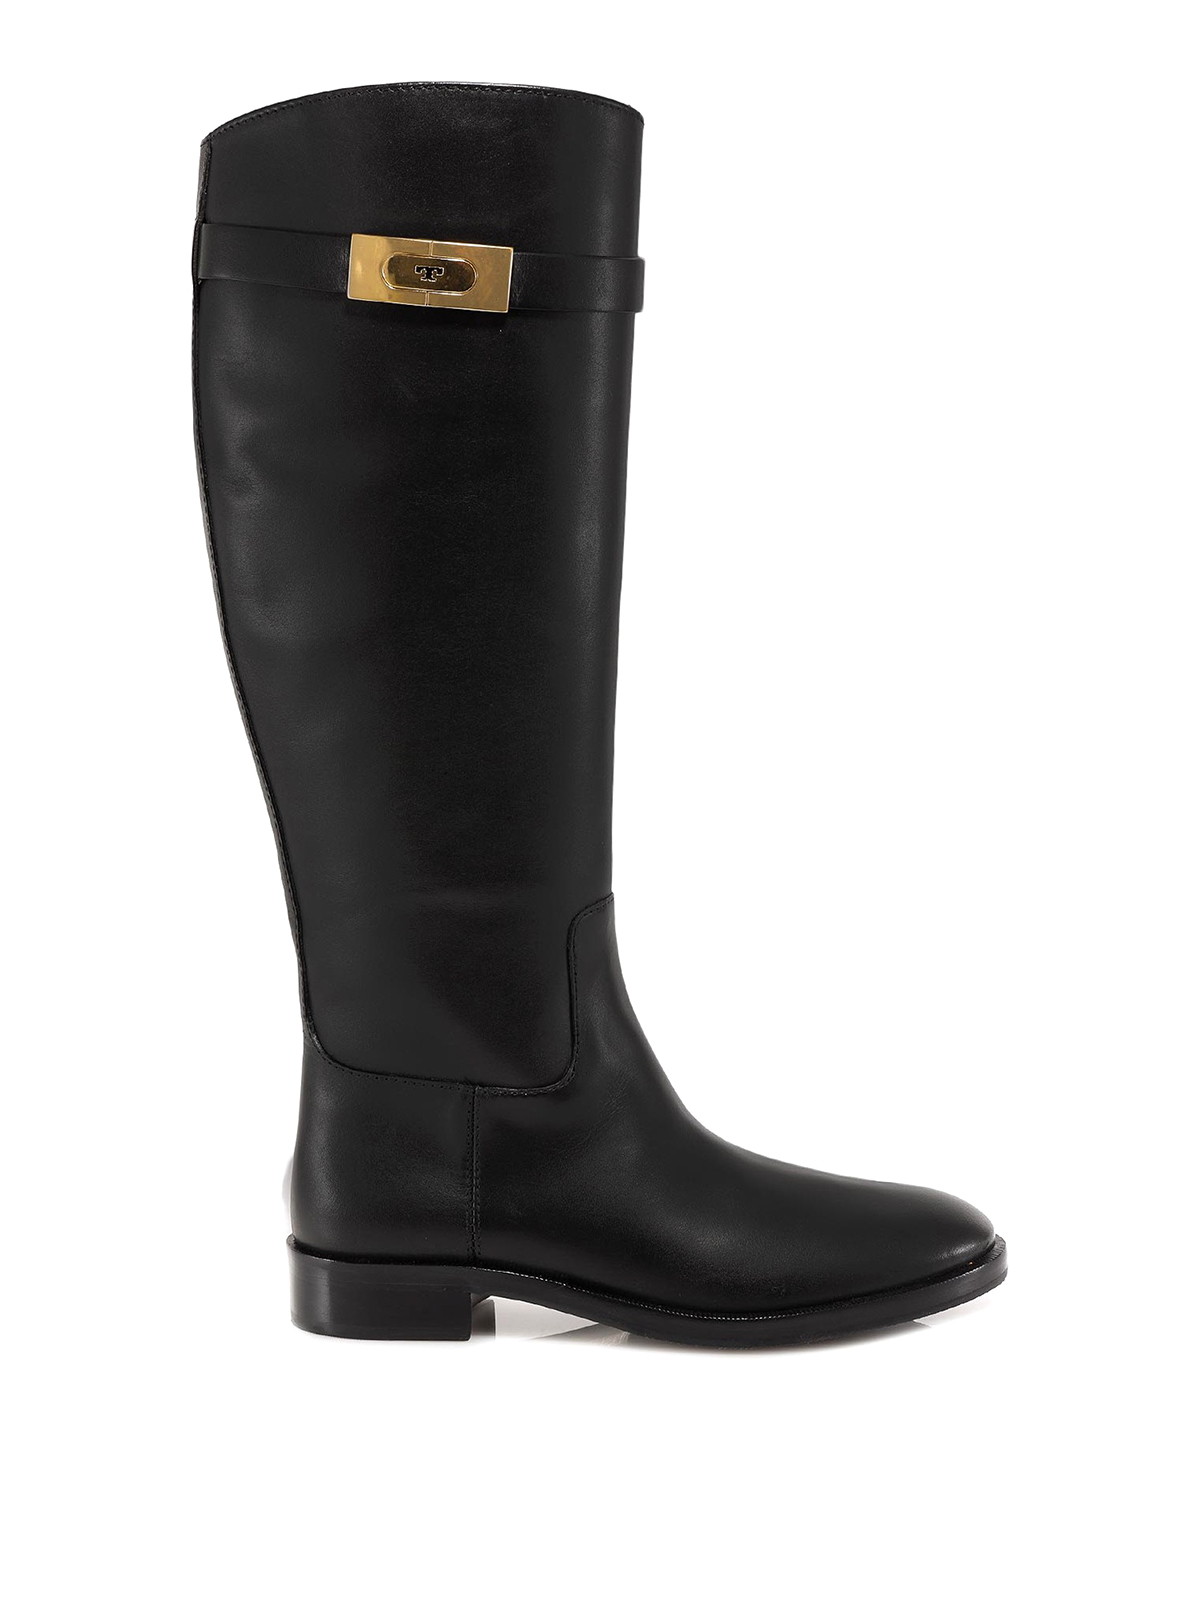 Boots Tory Burch - Leather rider boots - 77223006 | Shop online at iKRIX